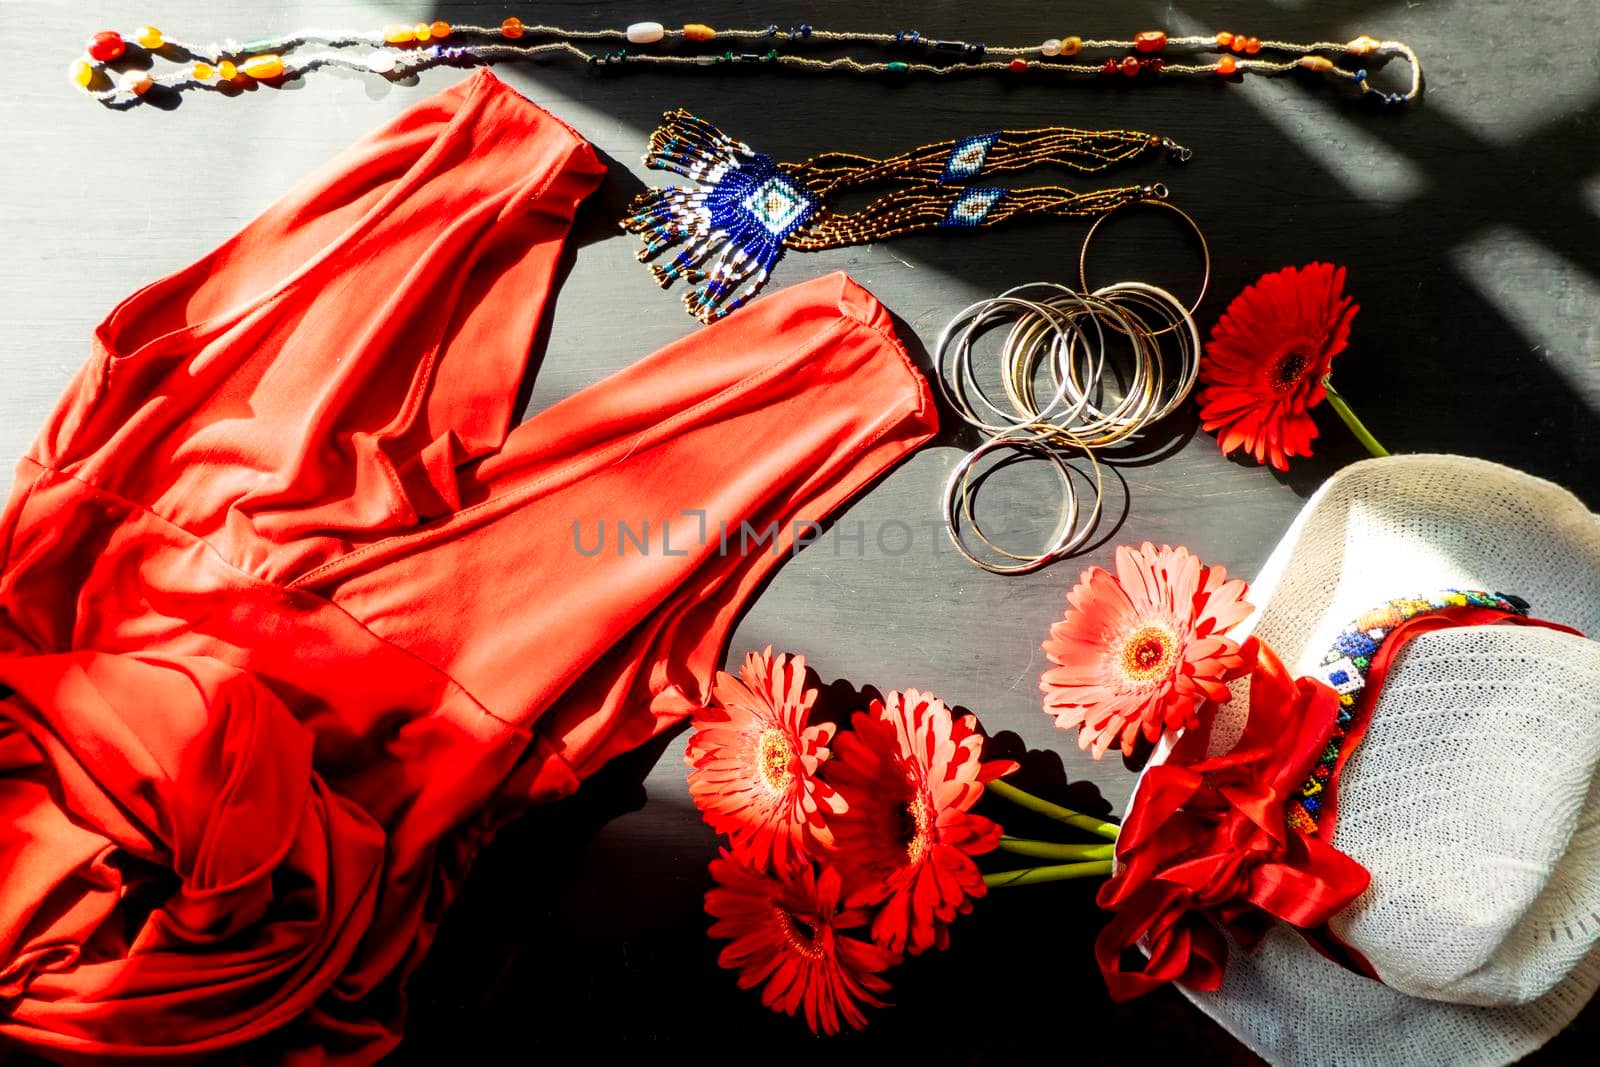 flat lay of a fashionable look from red and white accessories on a black background. Scarlet dress and white hat with a ribbon, jewelry made of beads and small stones, light jingling bracelets